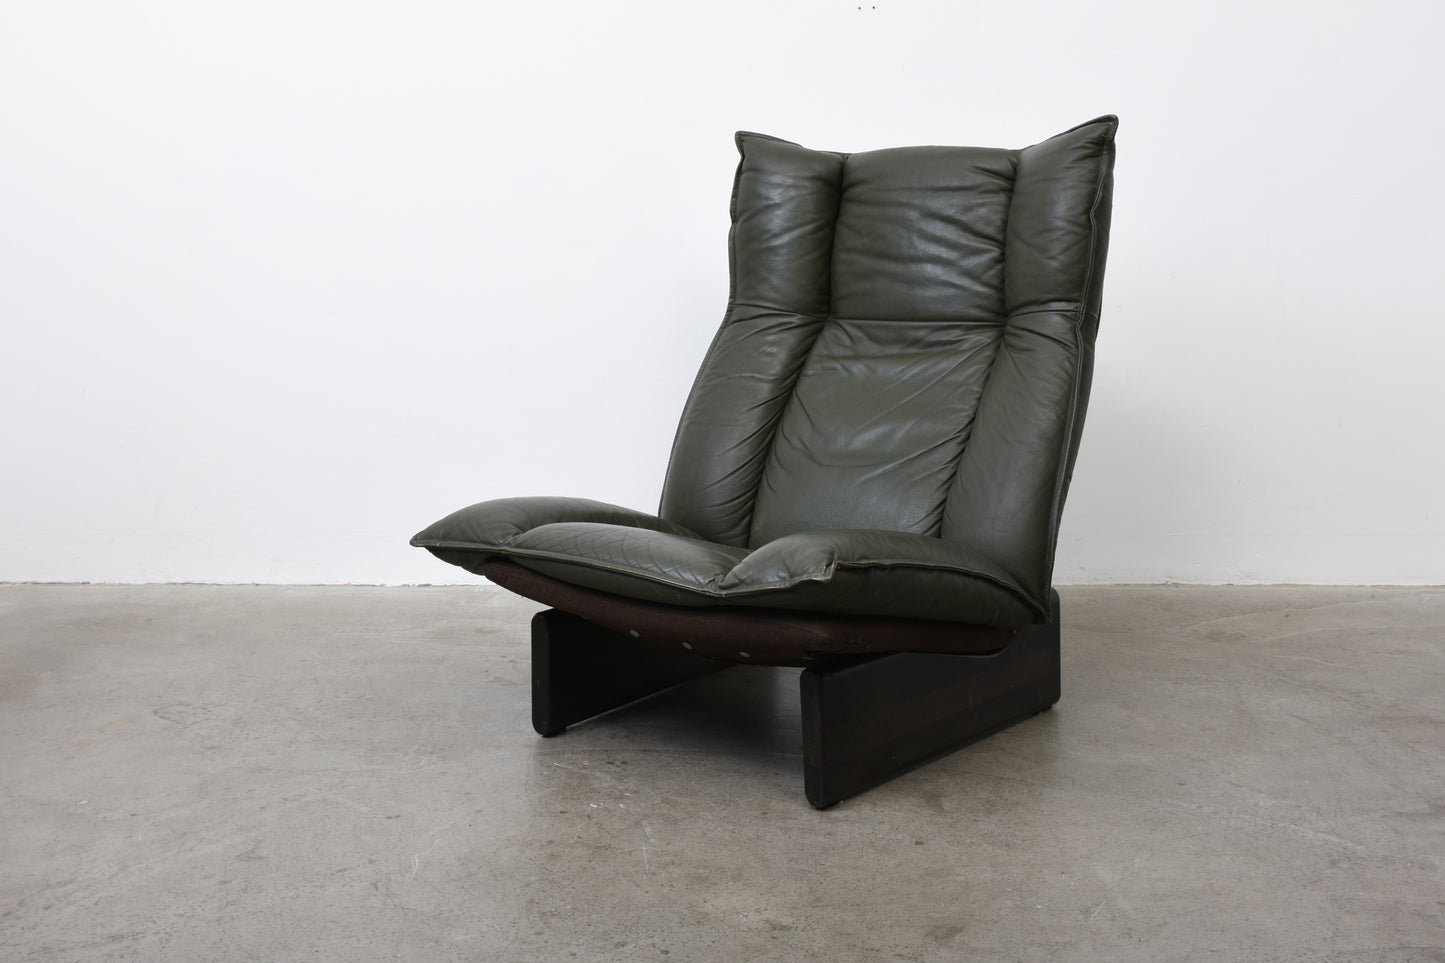 1970s Finnish leather lounger